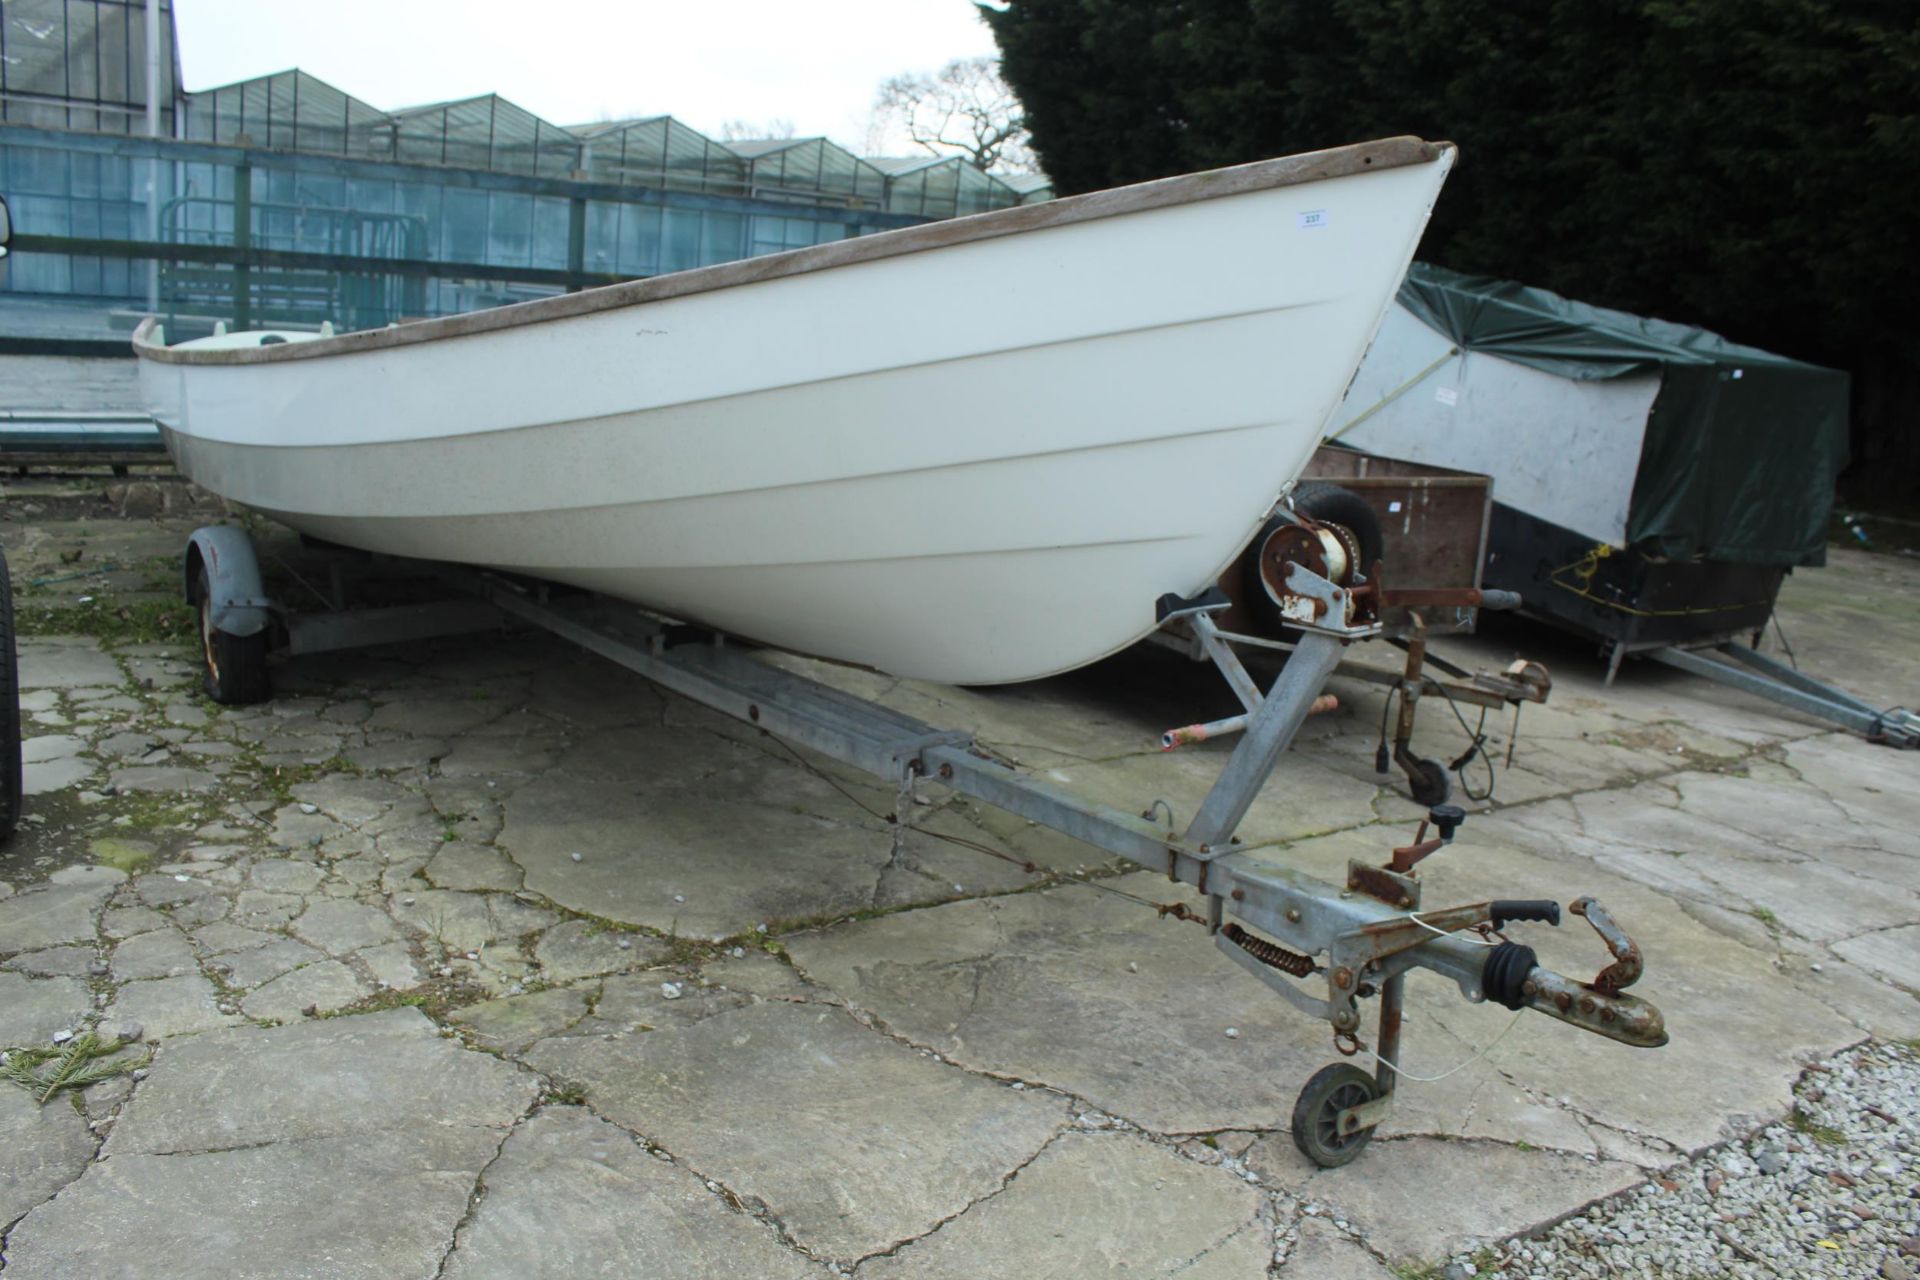 DRASCOMBE LUGGER BOAT AND BOAT TRAILER SPEC LENGTH 5.72M WATERLINE LENGTH 4.57M BEAM 1.90M SAILING